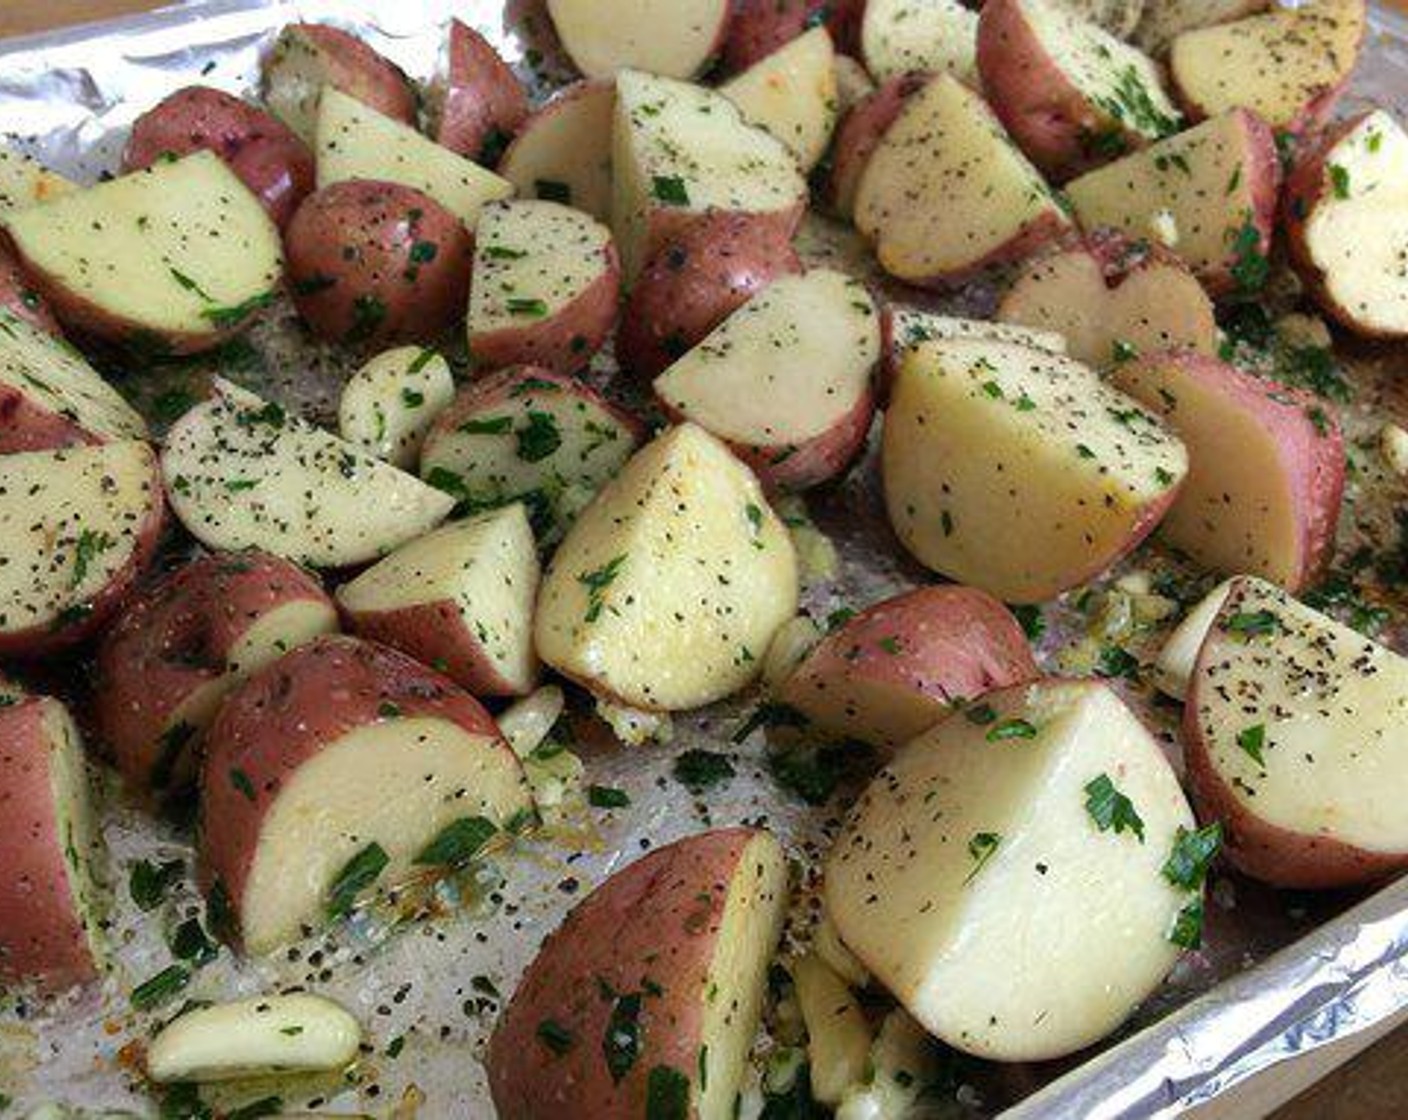 step 2 Place your Baby Red Potatoes (6) and lay them on the same baking sheet you cooked your bacon, add Olive Oil (as needed) and a few spoons of bacon fat, and coat with Coarse Salt (to taste), Ground Black Pepper (to taste), Fresh Parsley (to taste), and Garlic (to taste).